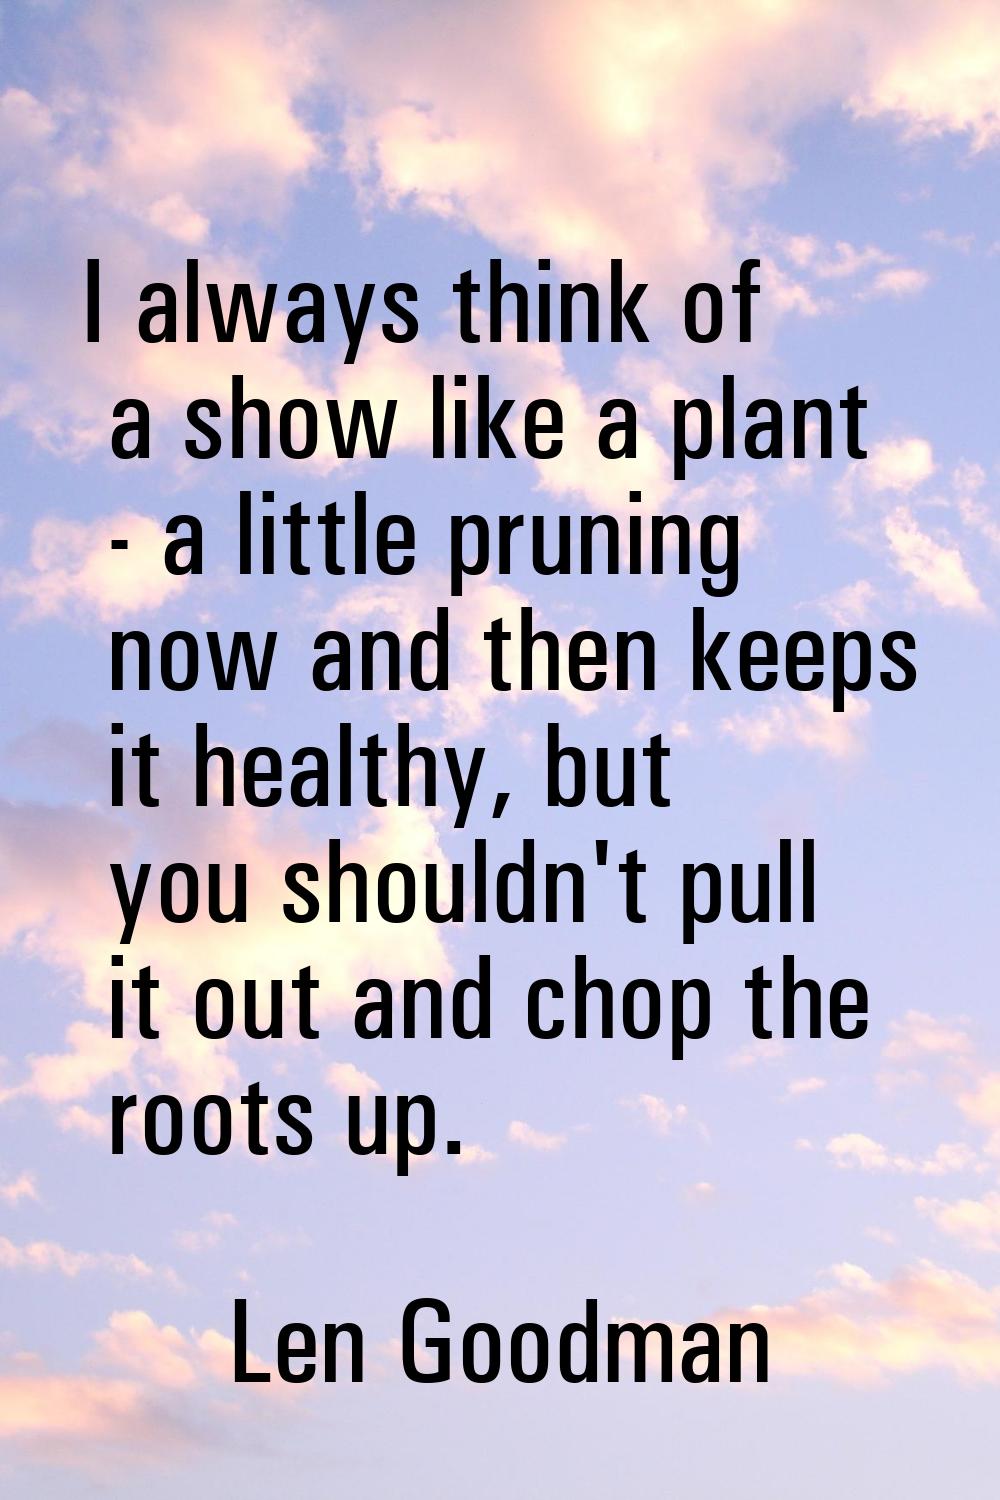 I always think of a show like a plant - a little pruning now and then keeps it healthy, but you sho